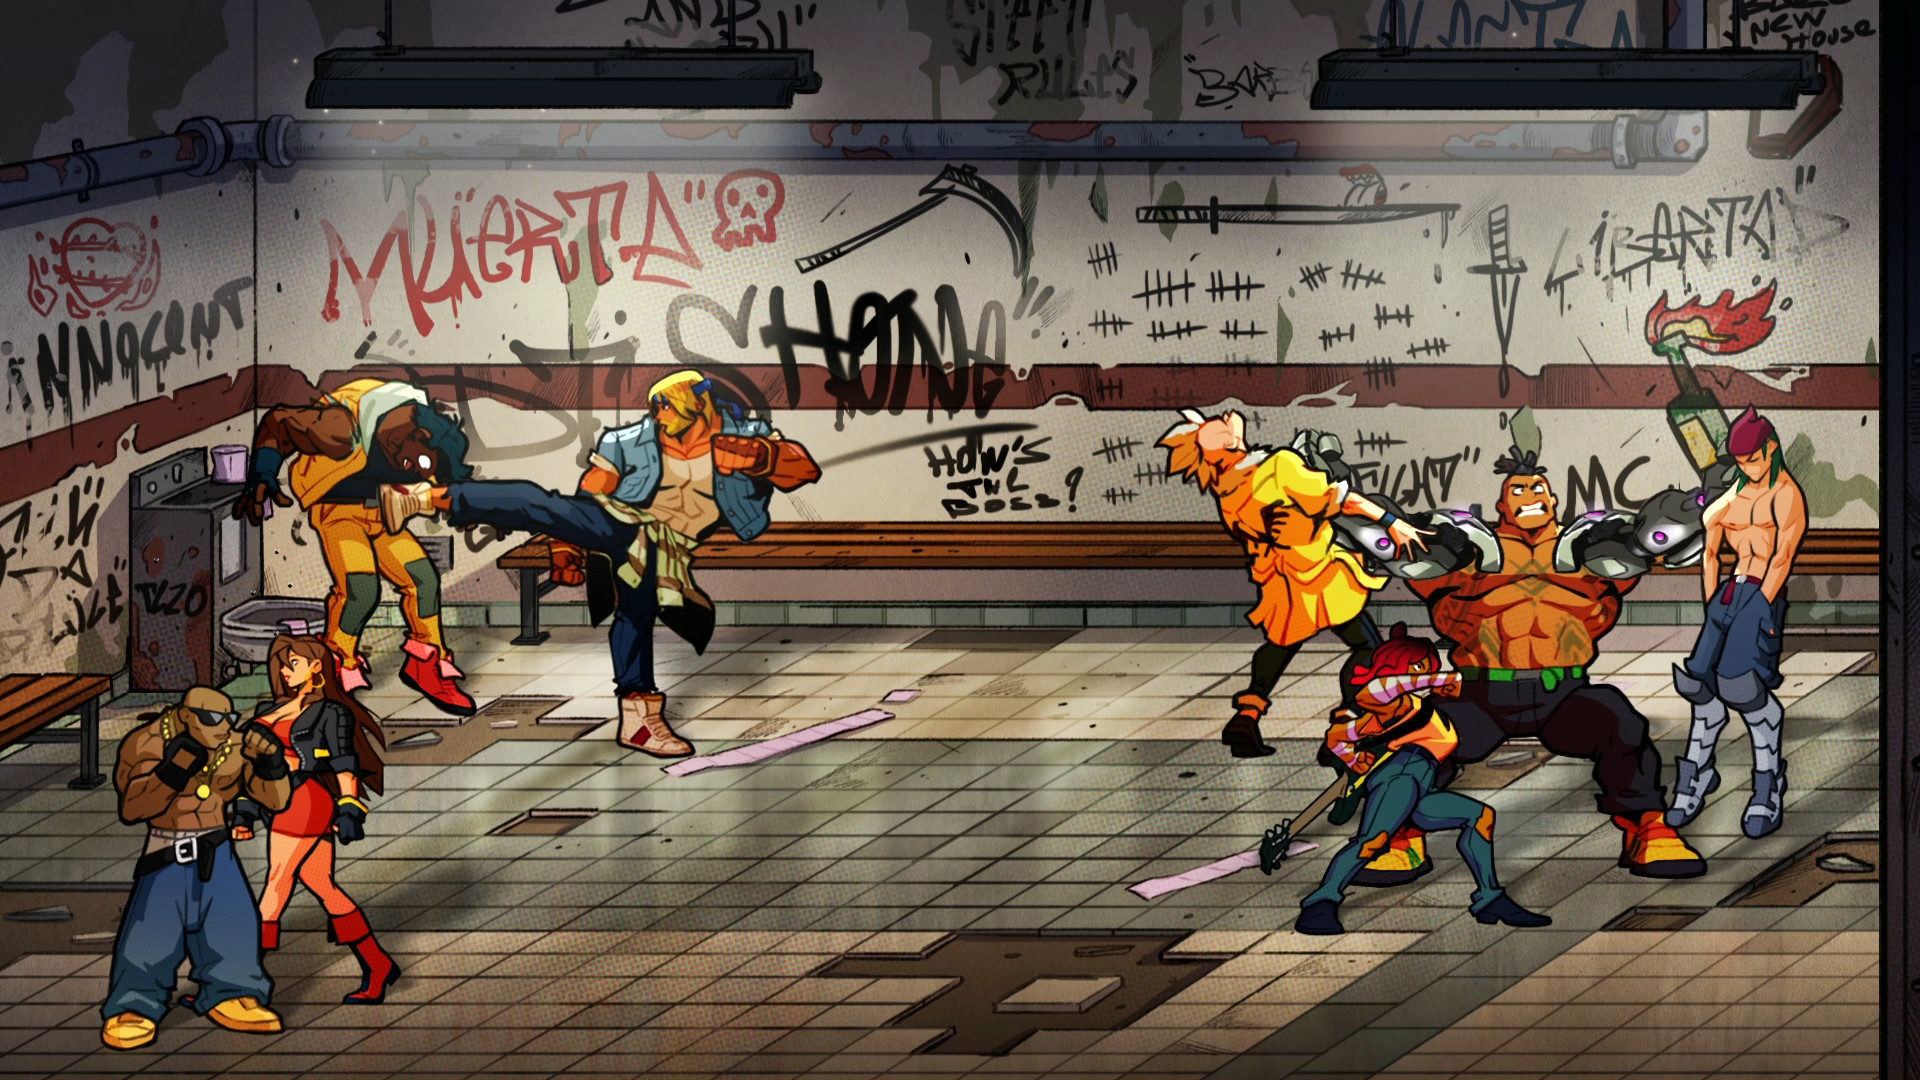 Streets Of Rage 4 On Steam